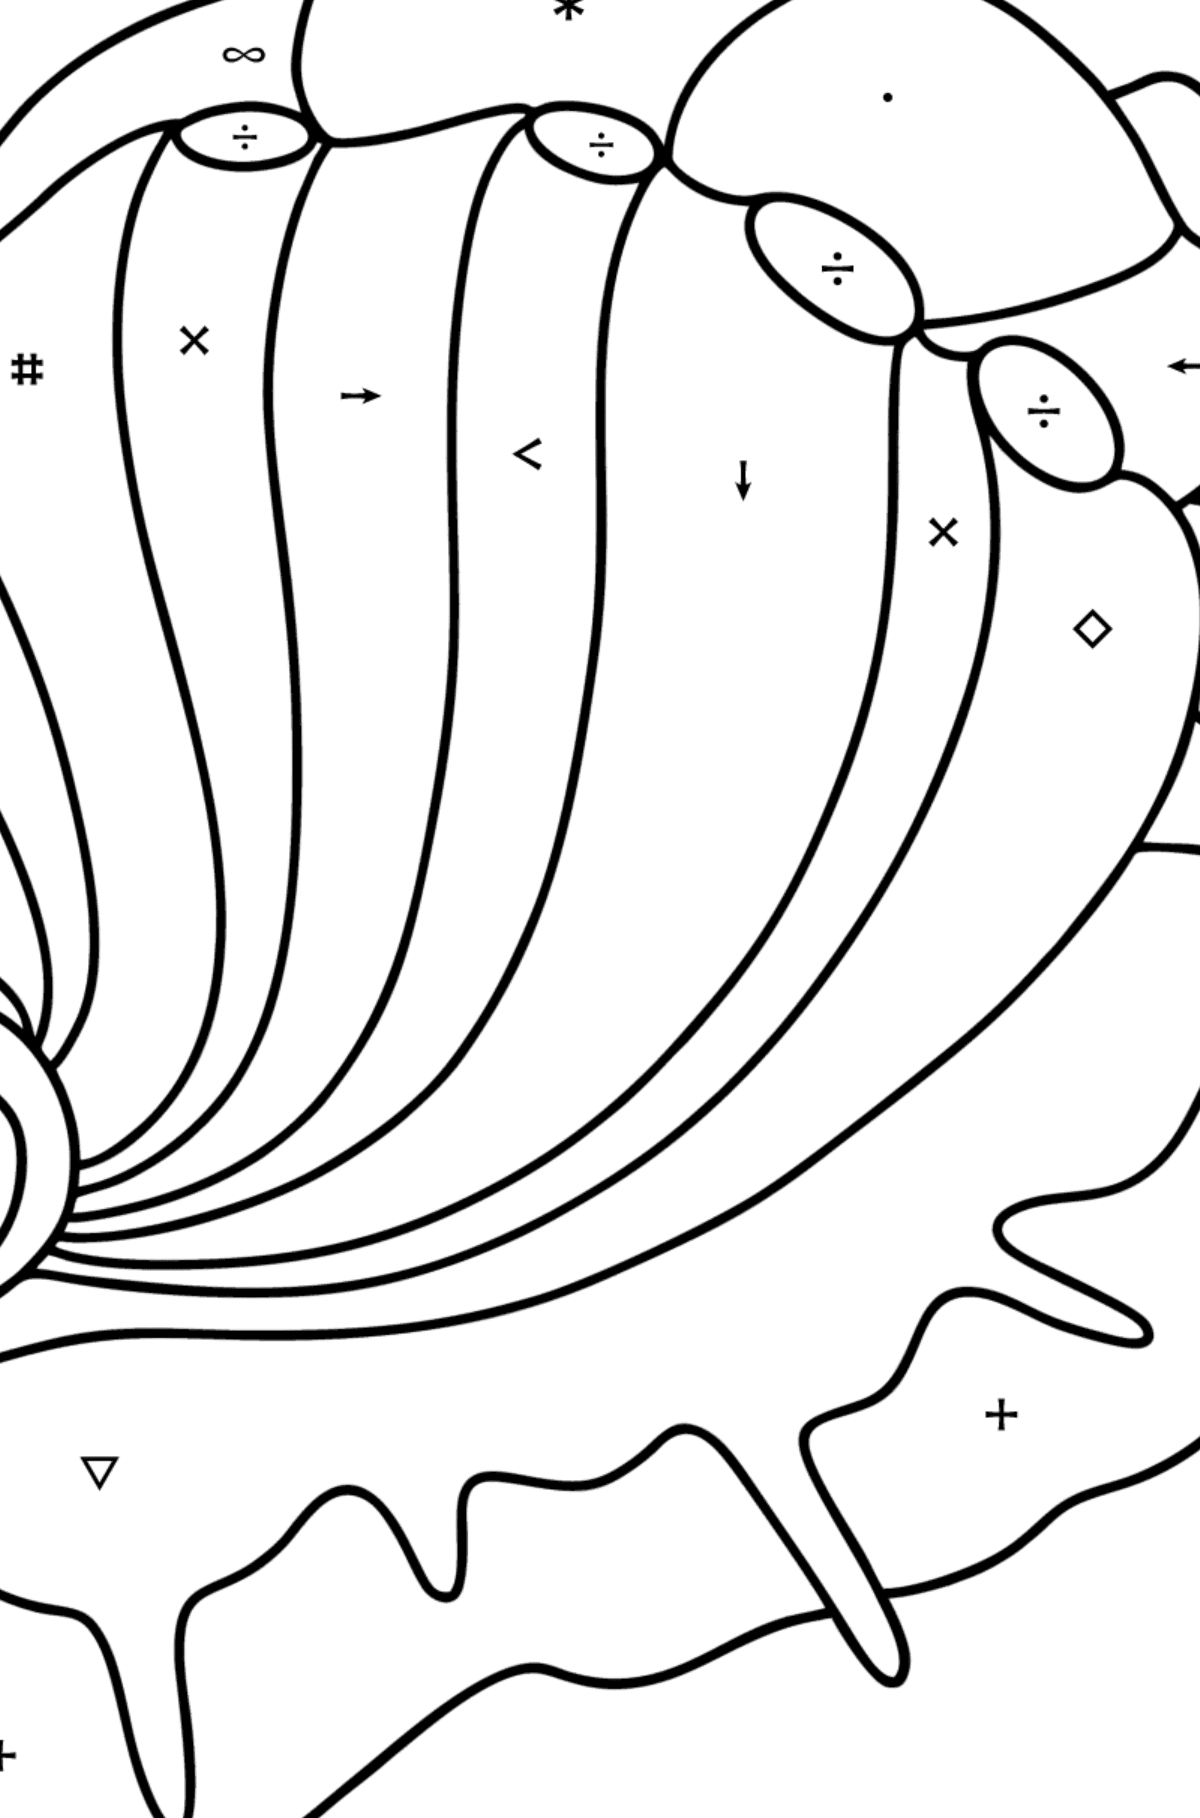 Mollusk abalone coloring page - Coloring by Symbols for Kids